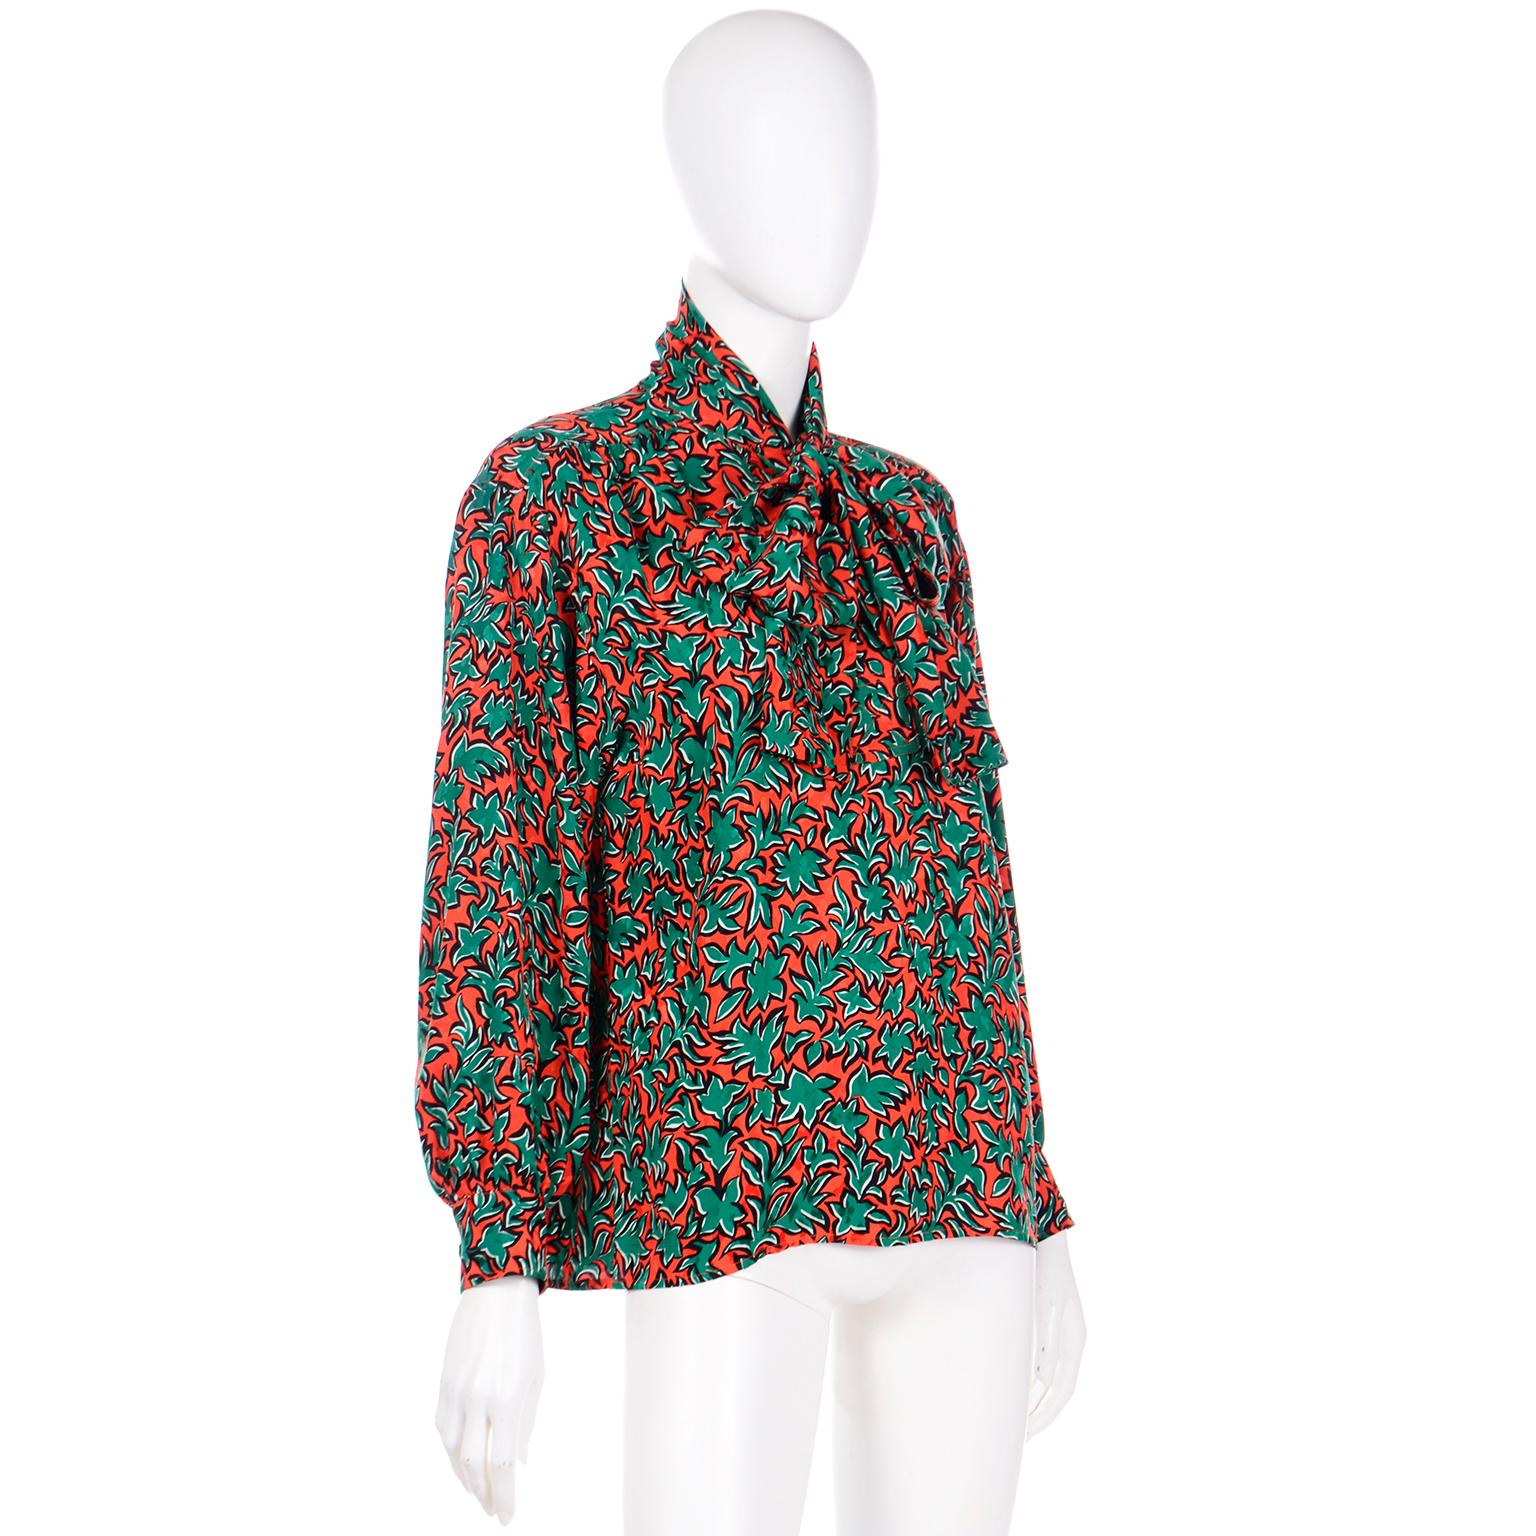 Yves Saint Laurent Orange & Green Leaf Print Blouse With Bow Sash In Excellent Condition For Sale In Portland, OR